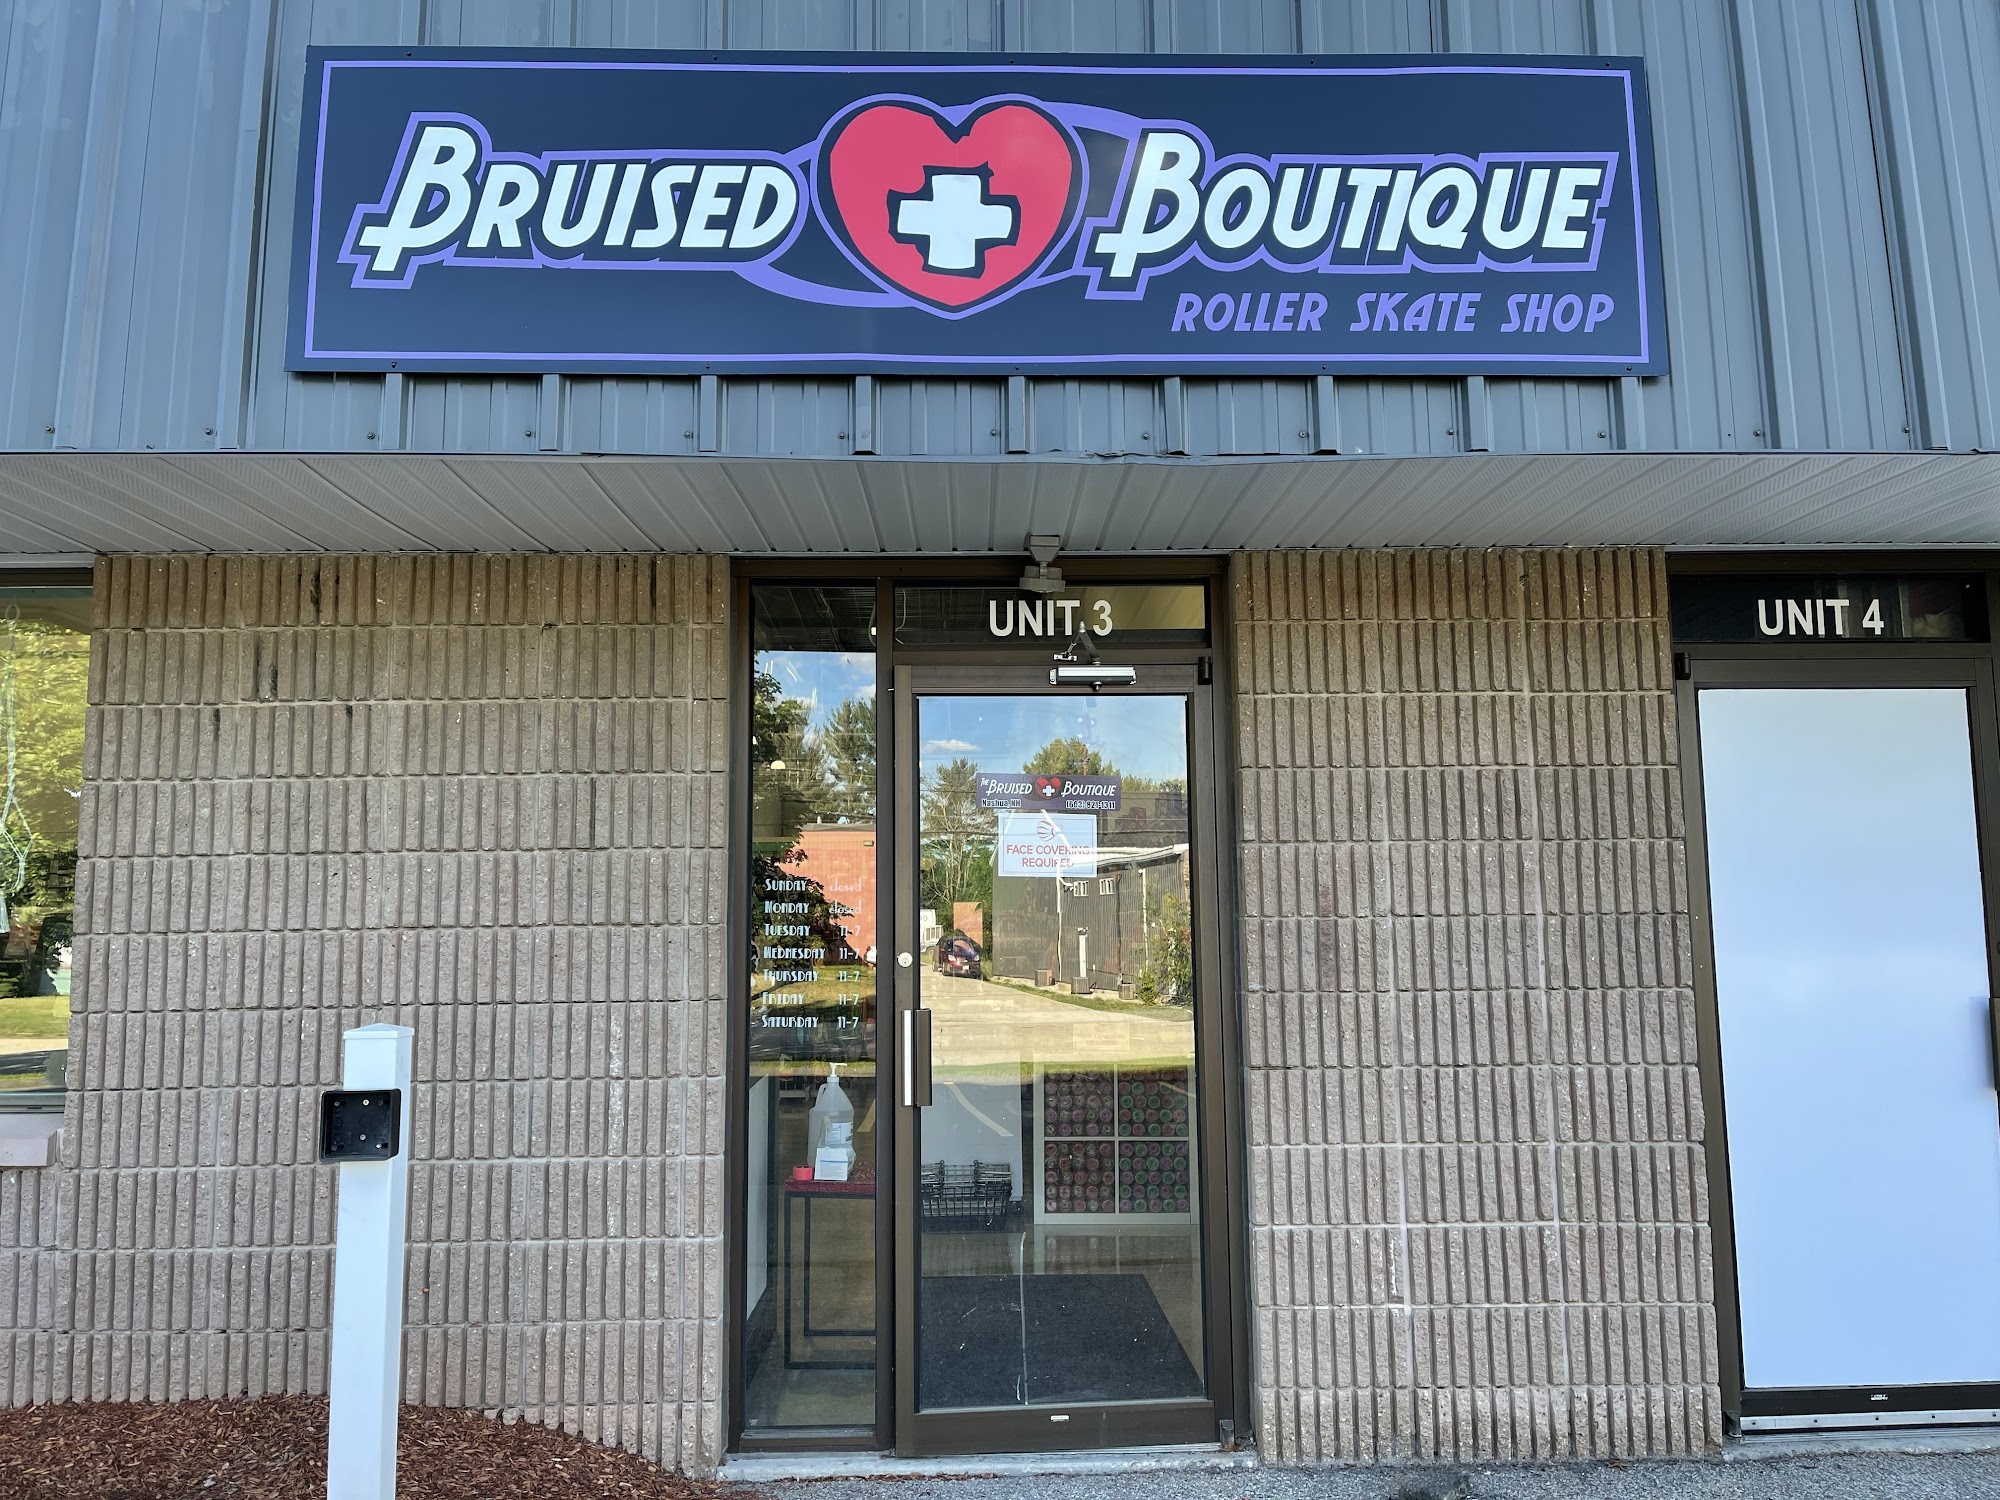 The Bruised Boutique Skate Shop